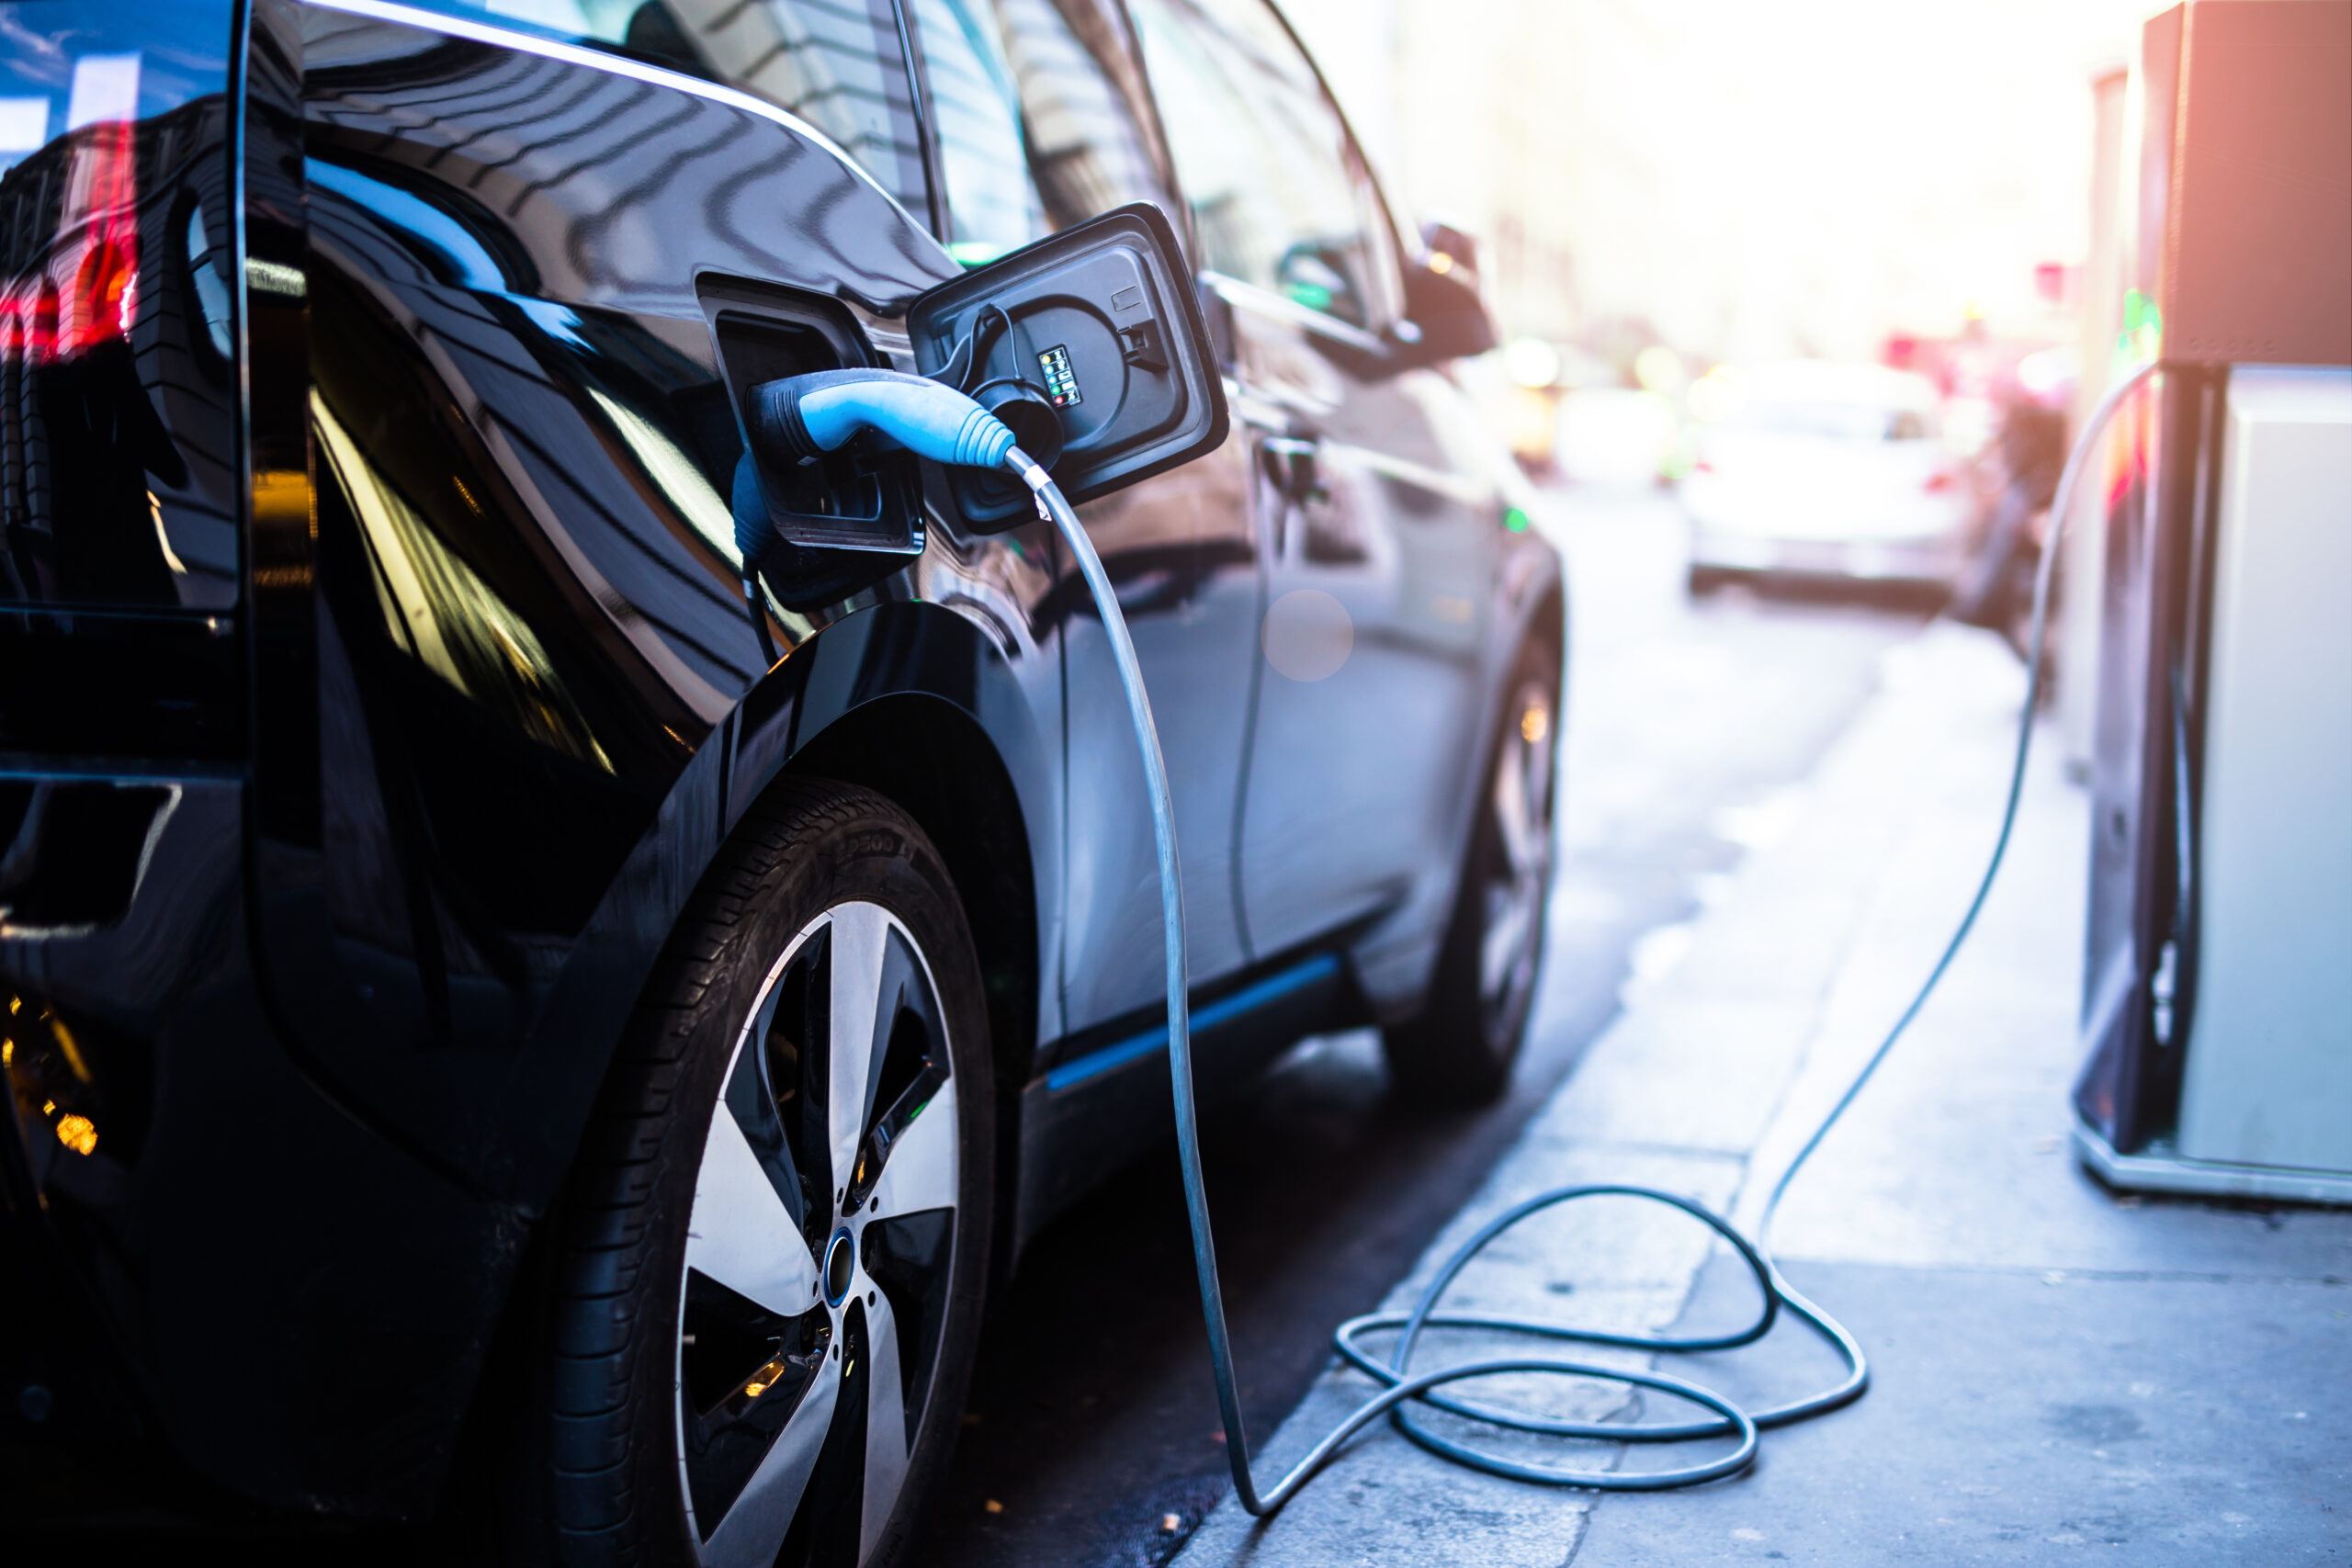 Pandemic could impact electric vehicle growth